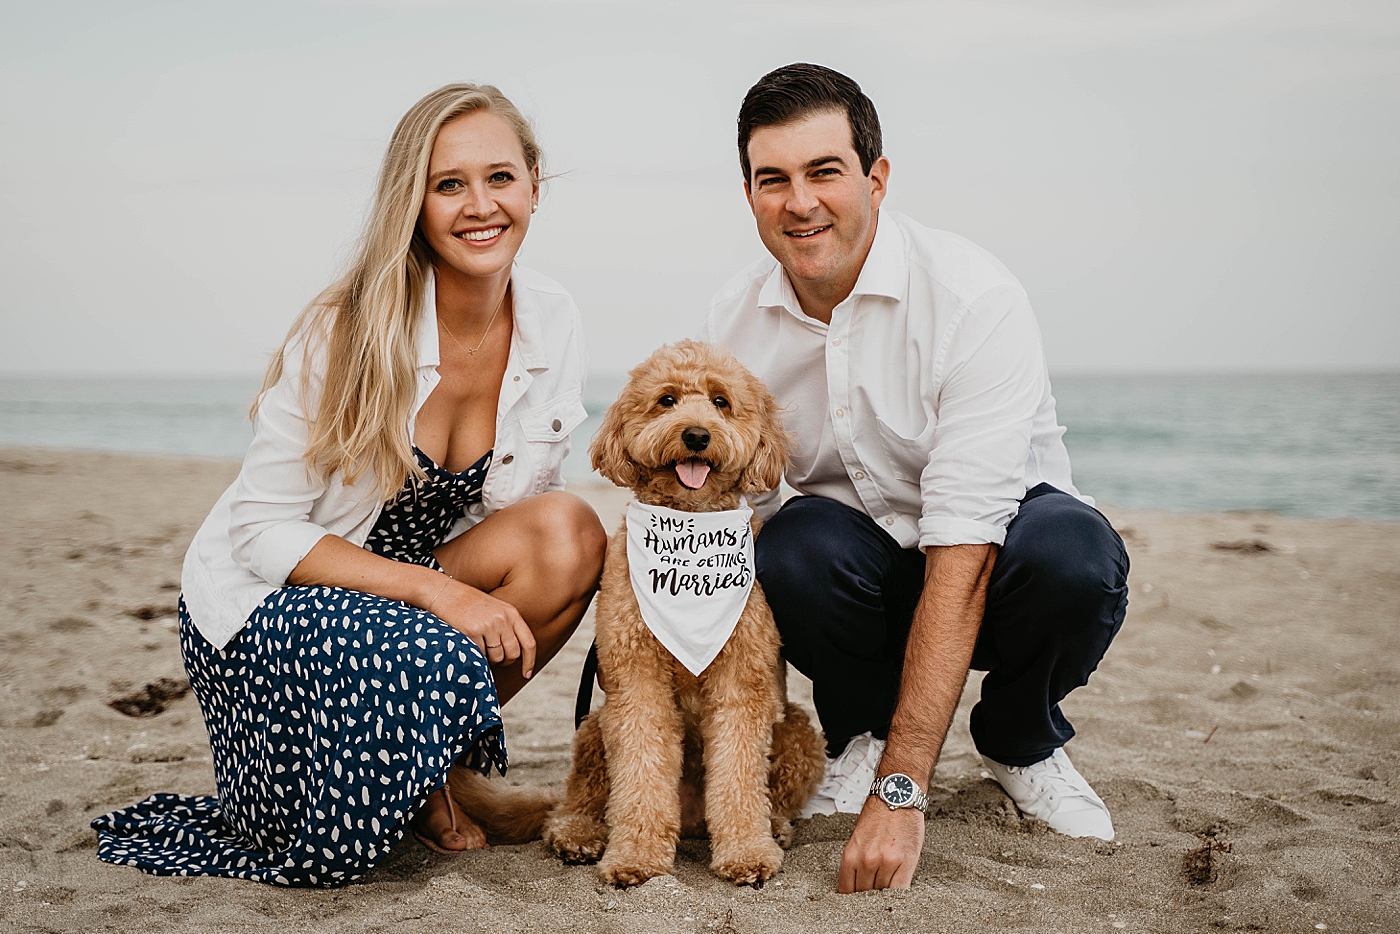 Couple crouching down with dog with cute scarf "My humans are getting Married" Palm Beach Engagement Photography captured by South Florida Engagement Photographer Krystal Capone Photography 